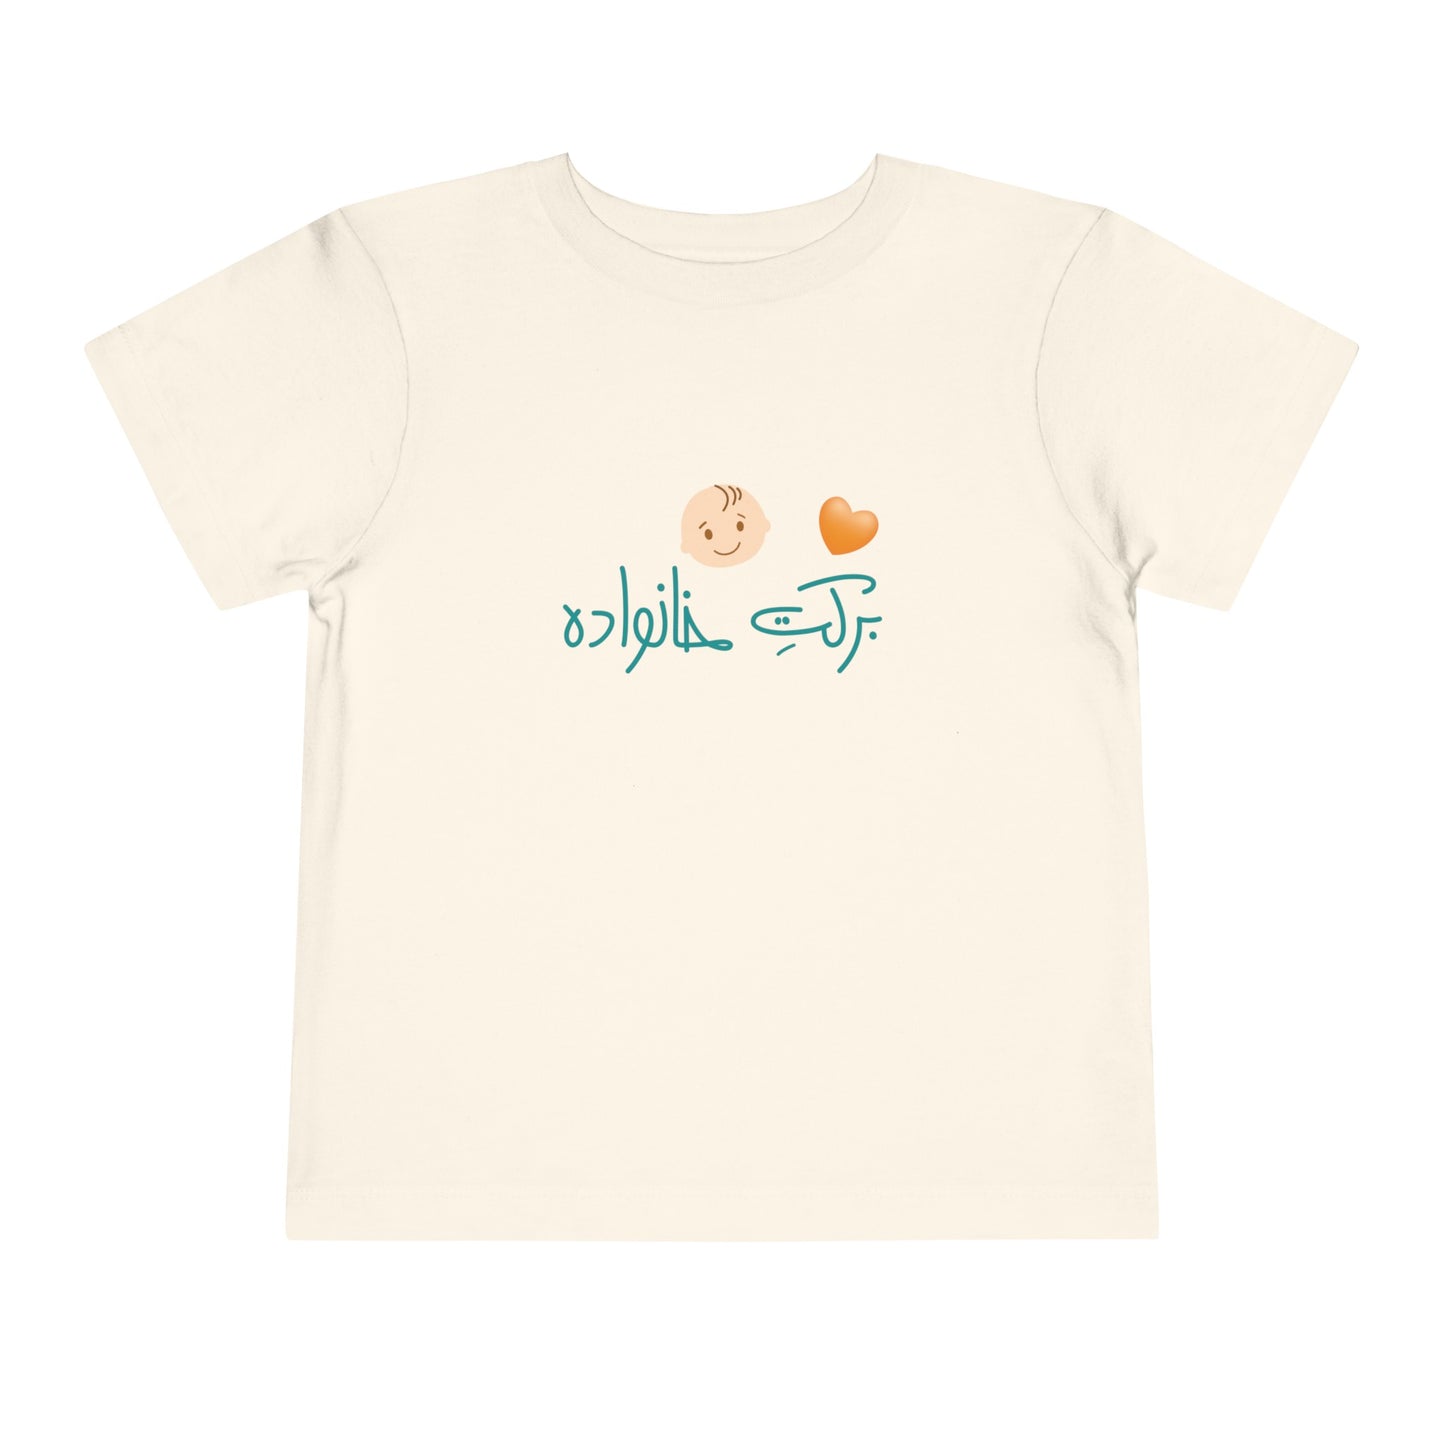 Toddler Short Sleeve Tee "The Blessing"/برکت